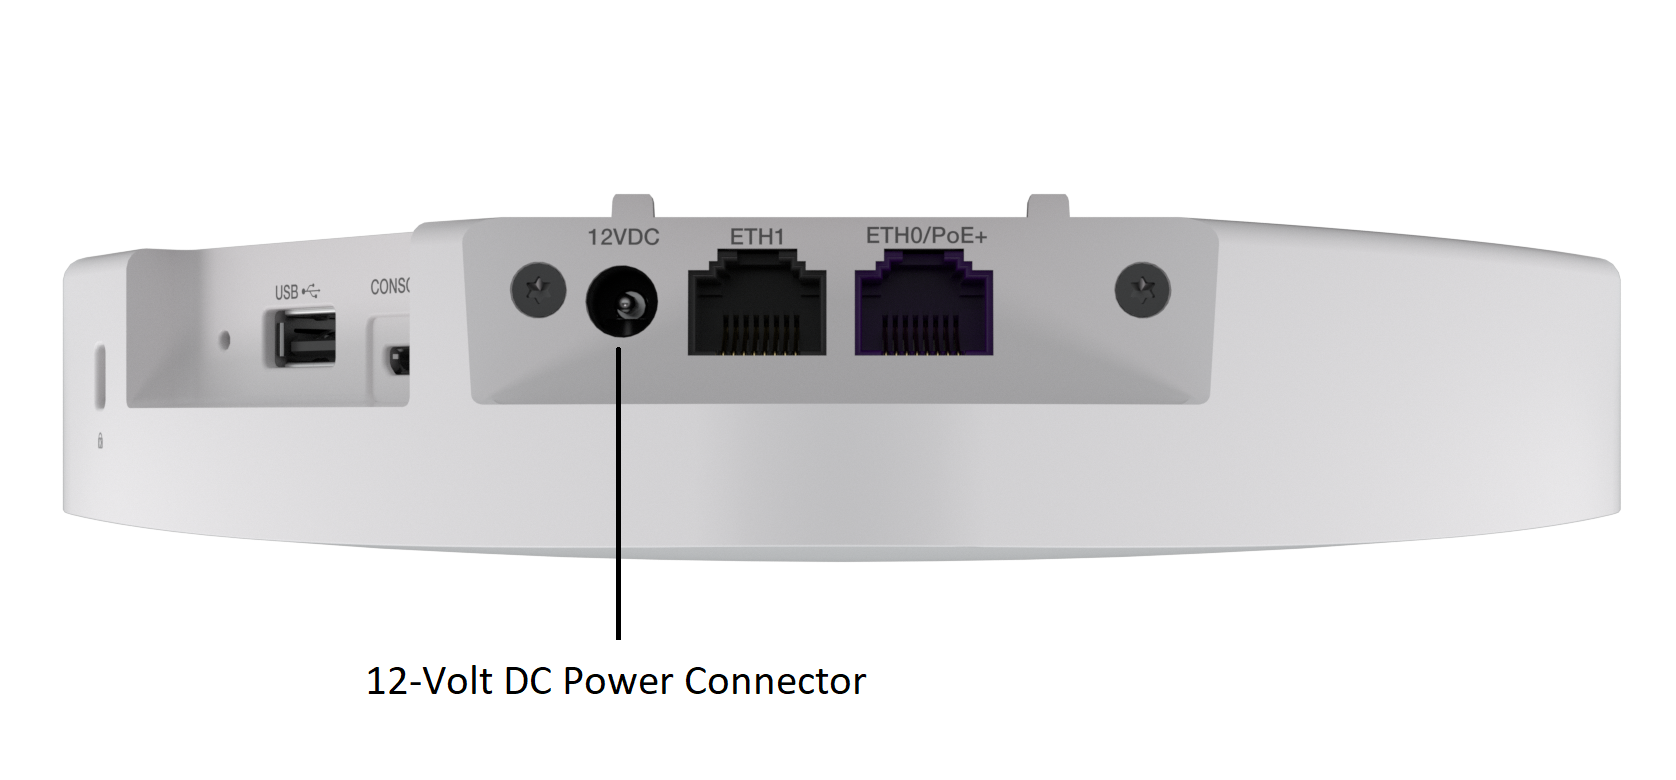 The AP3000 access point power port is located to the left of the ETH1 port.